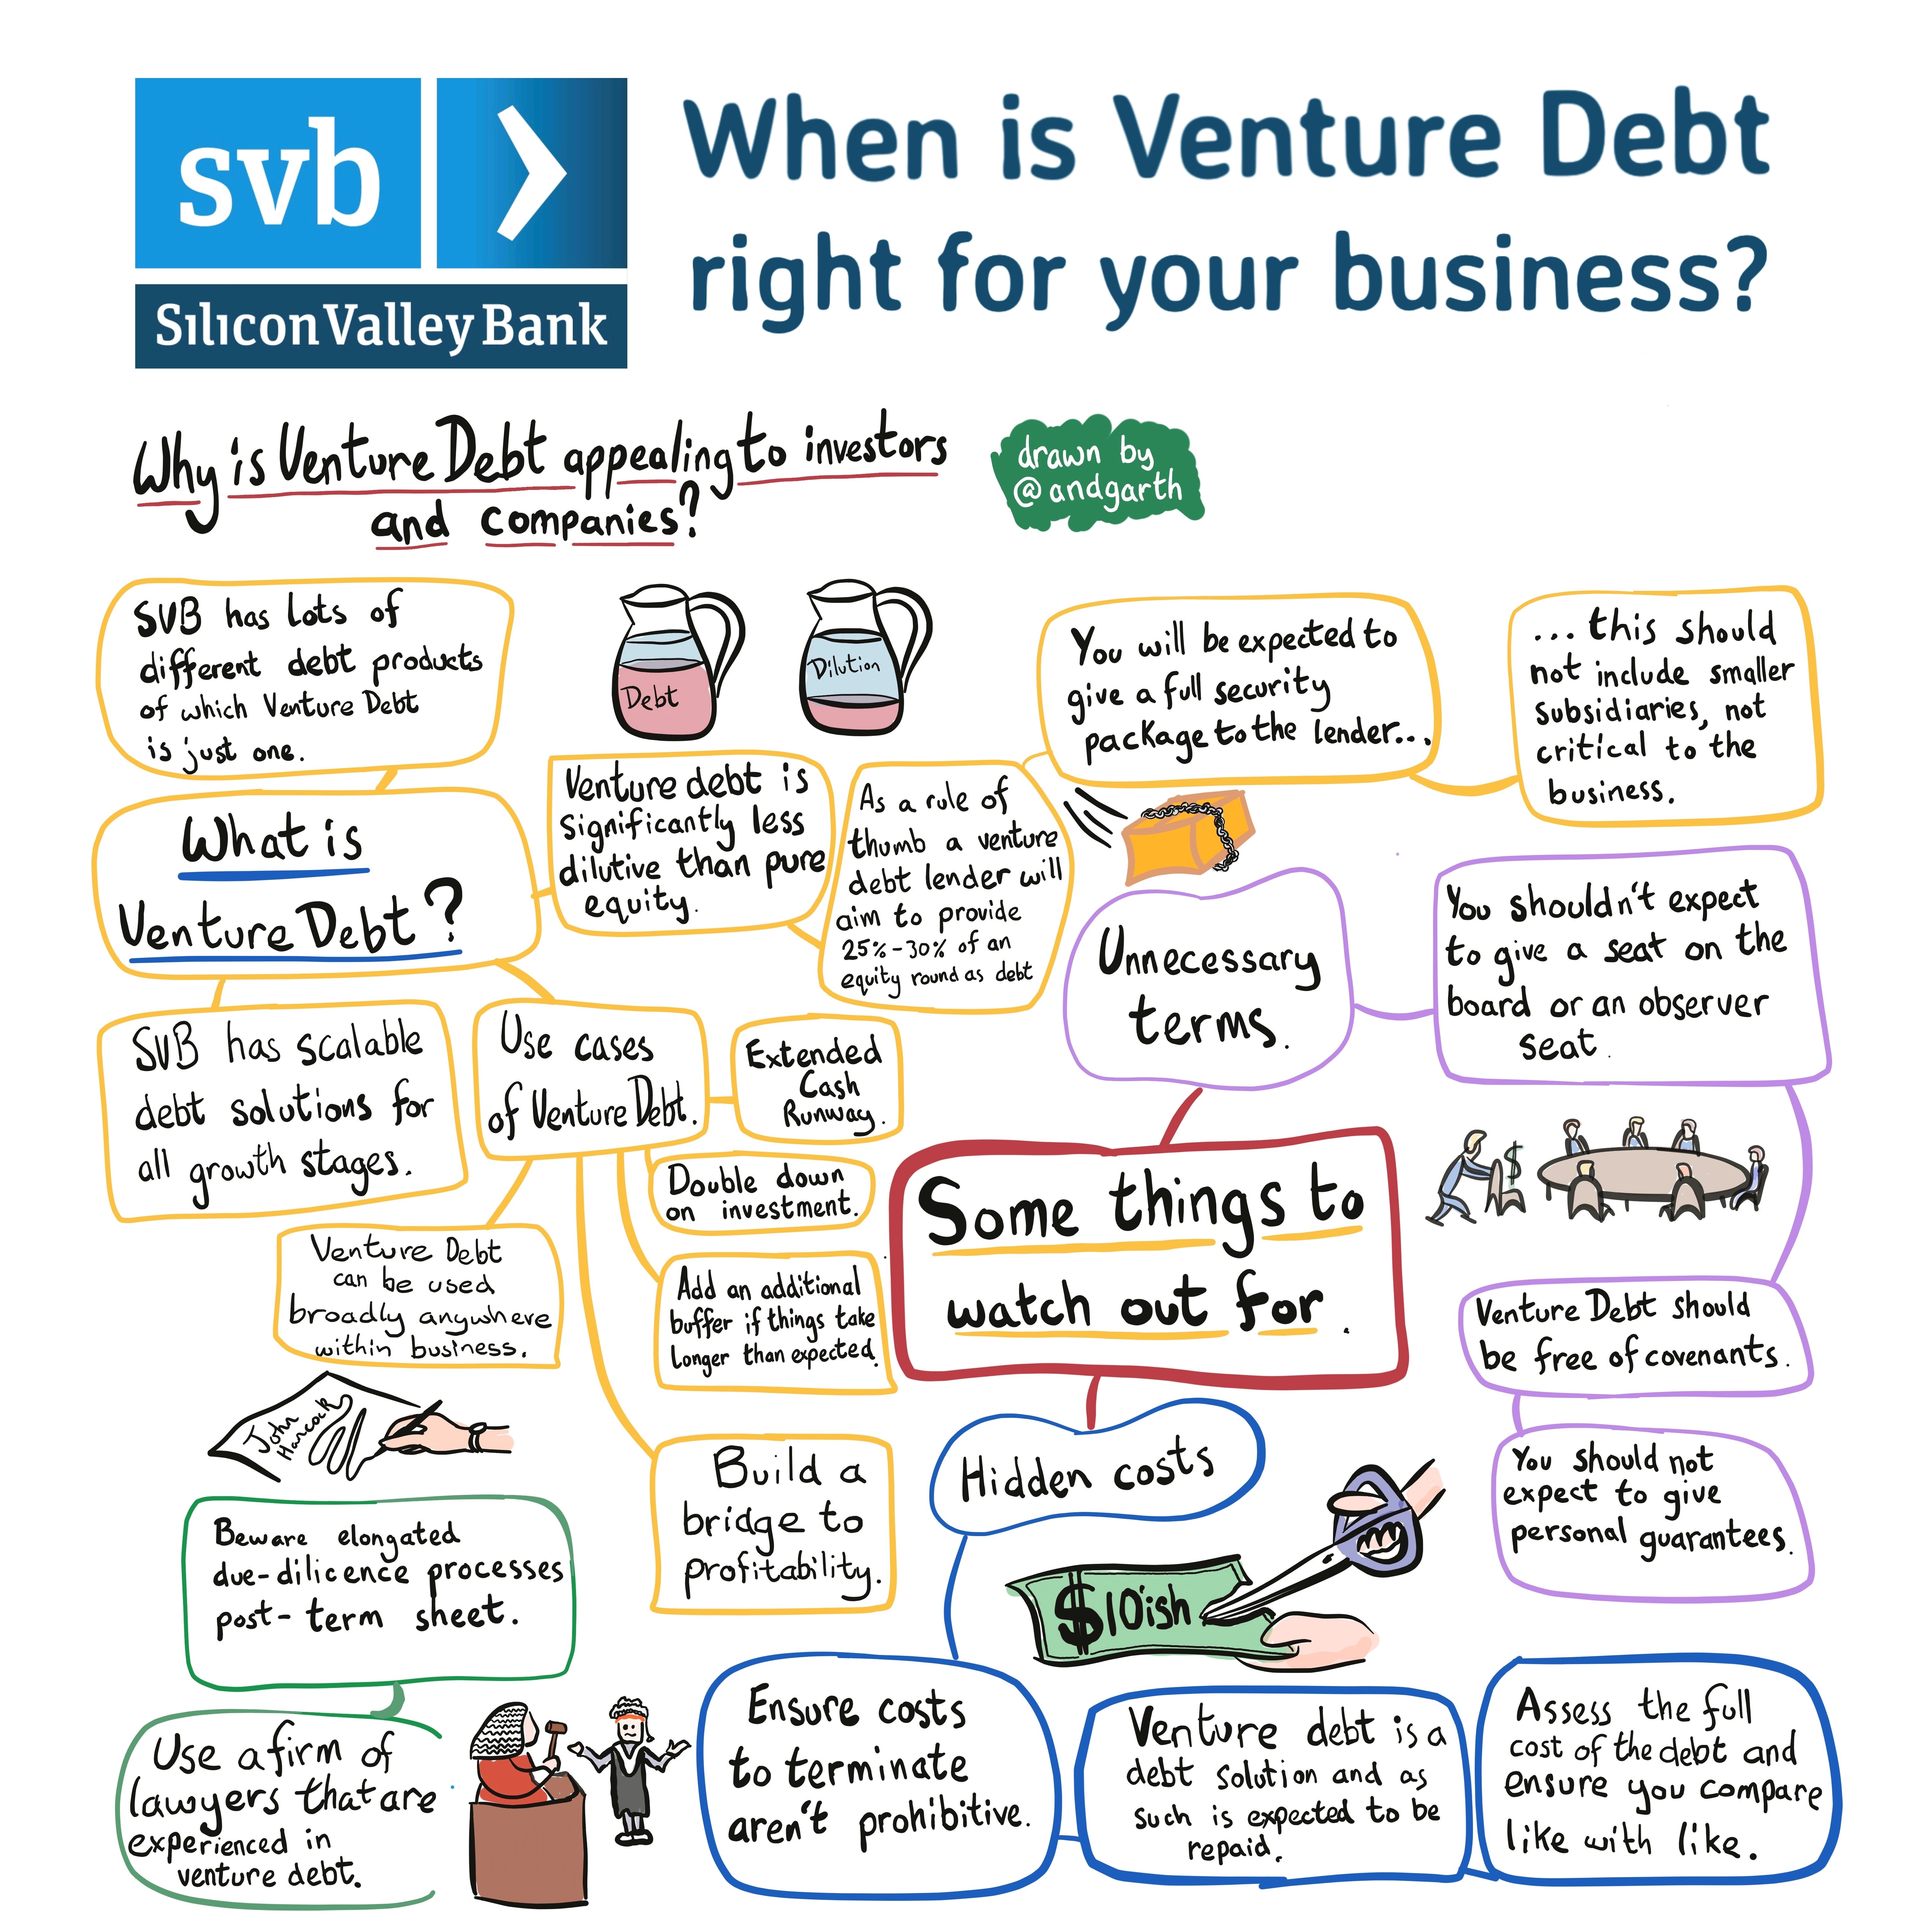 What are the best venture debt blogs or resources?